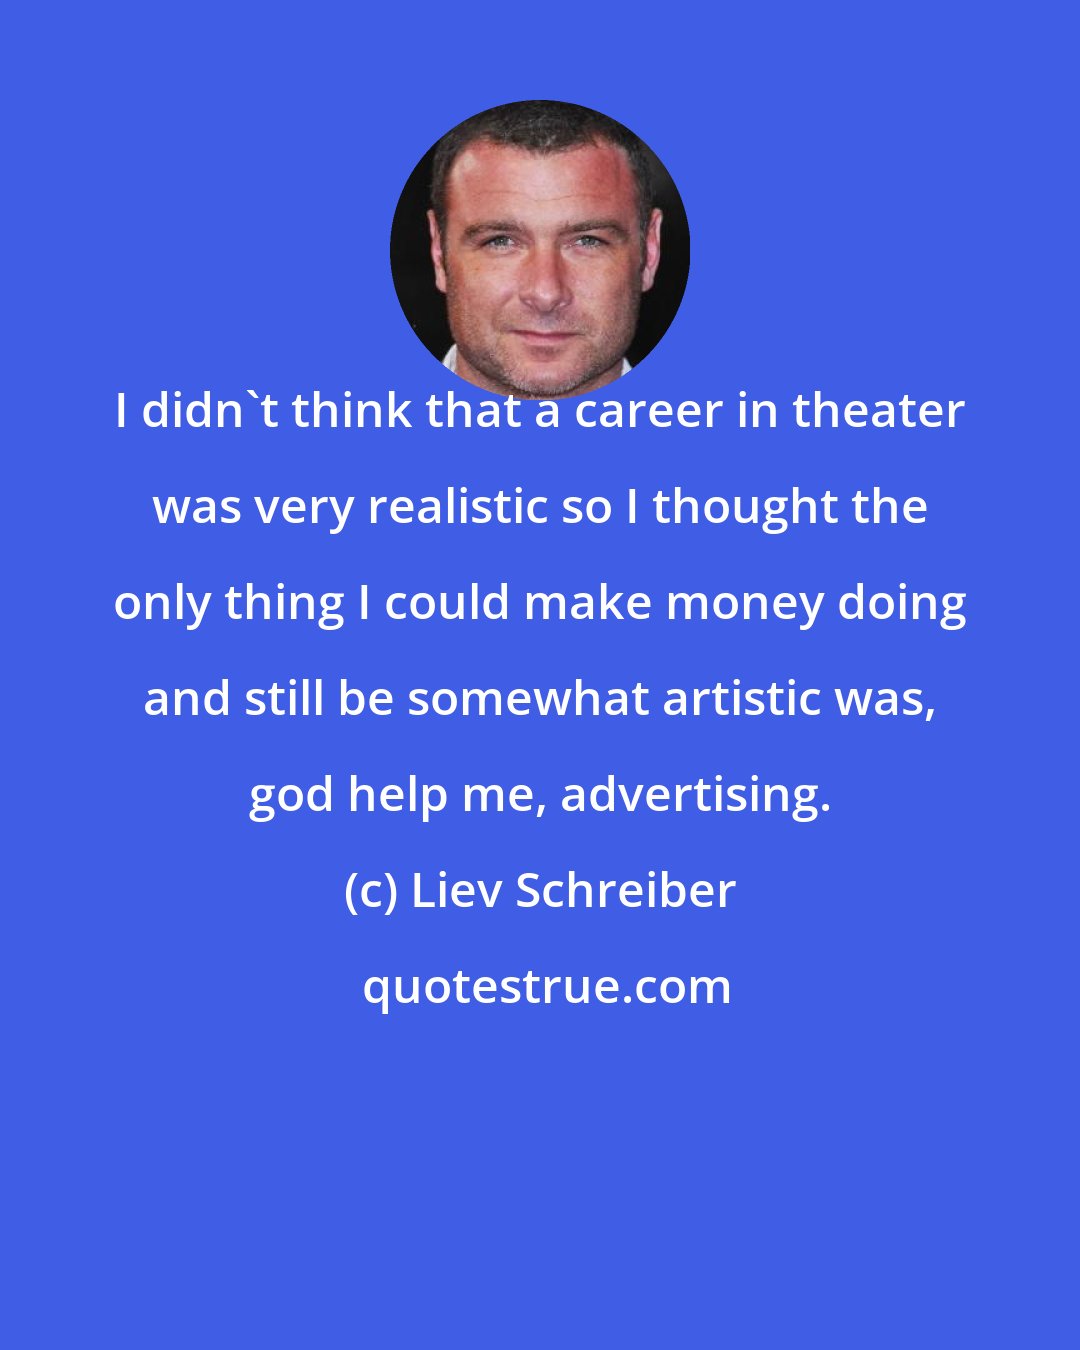 Liev Schreiber: I didn't think that a career in theater was very realistic so I thought the only thing I could make money doing and still be somewhat artistic was, god help me, advertising.